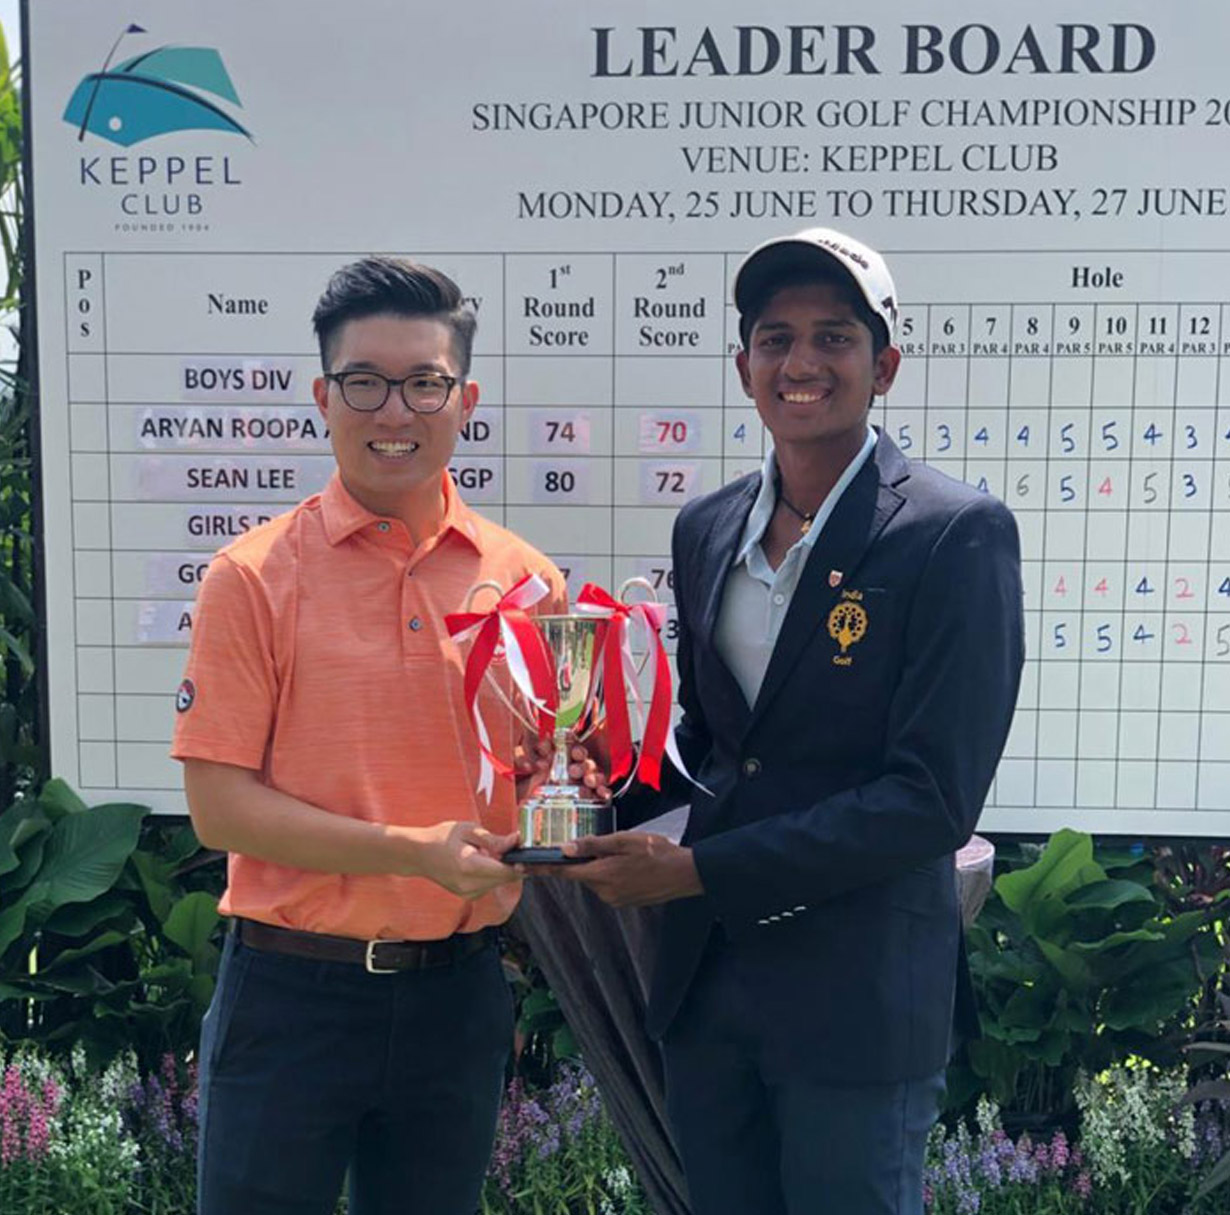 ryan becomes for the first Indian in 19 years to win the Singapore Open Junior Championship